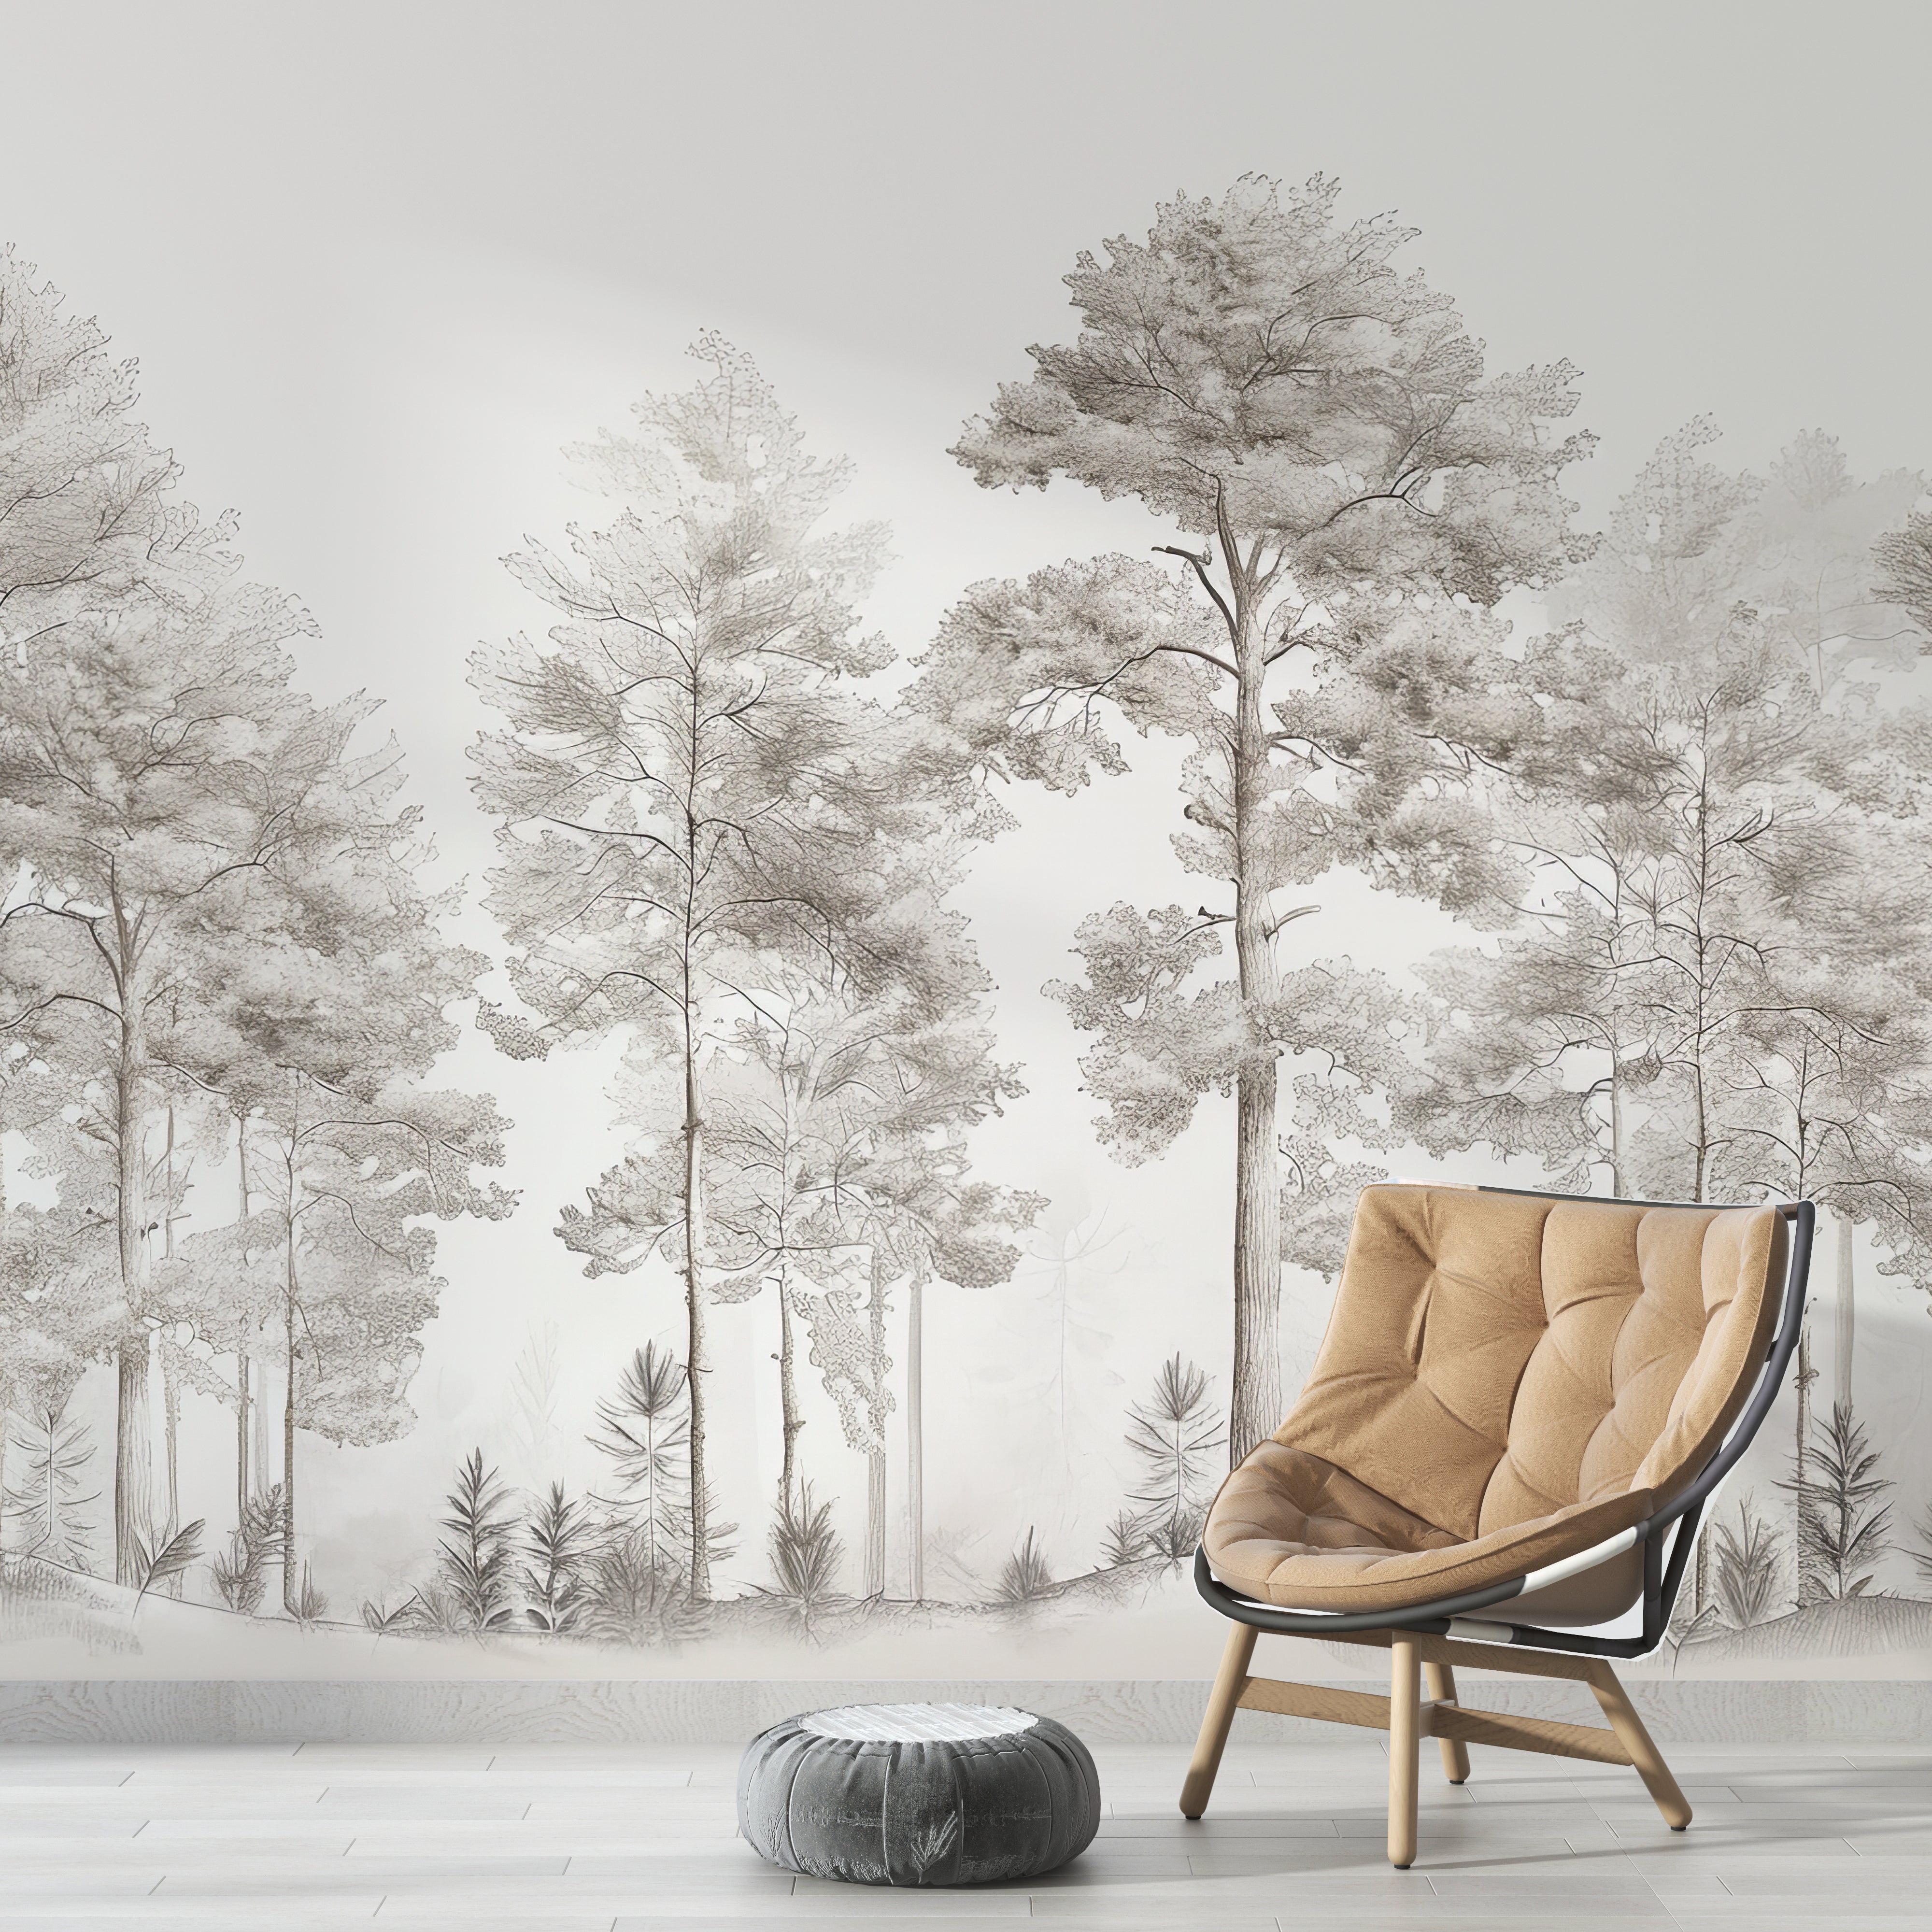 Sweetness of the woods - Panoramic Trees Wallpaper in Beige and Gray